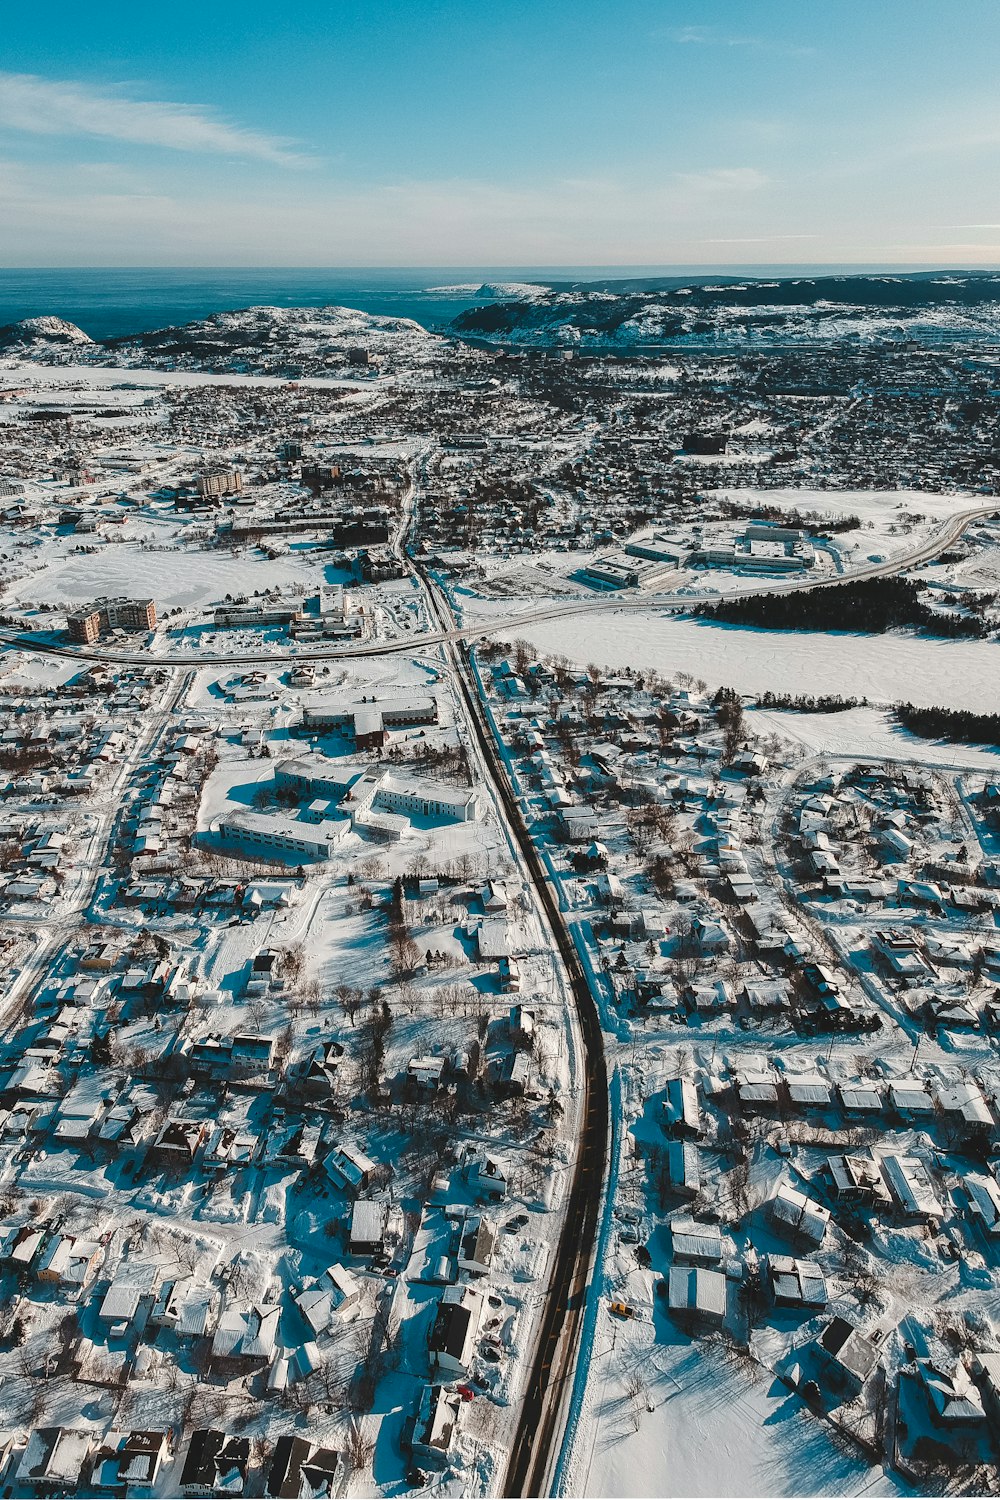 an aerial view of a snow covered town